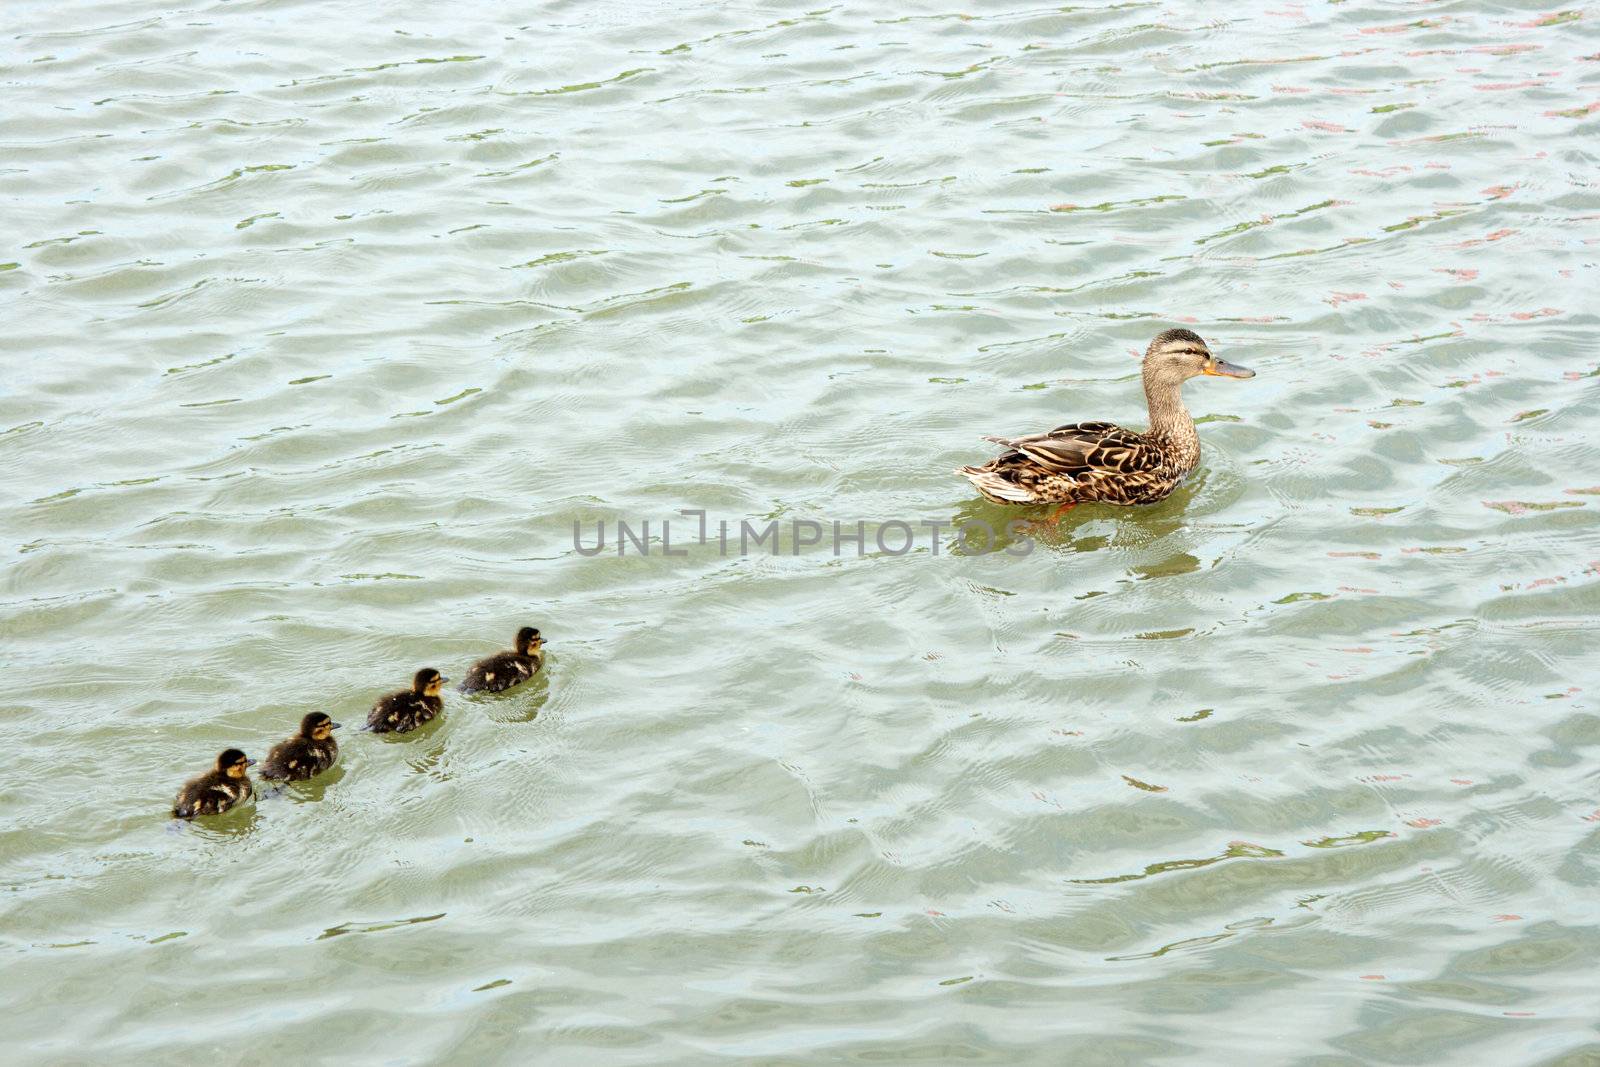 Wild duck with ducklings by aptyp_kok